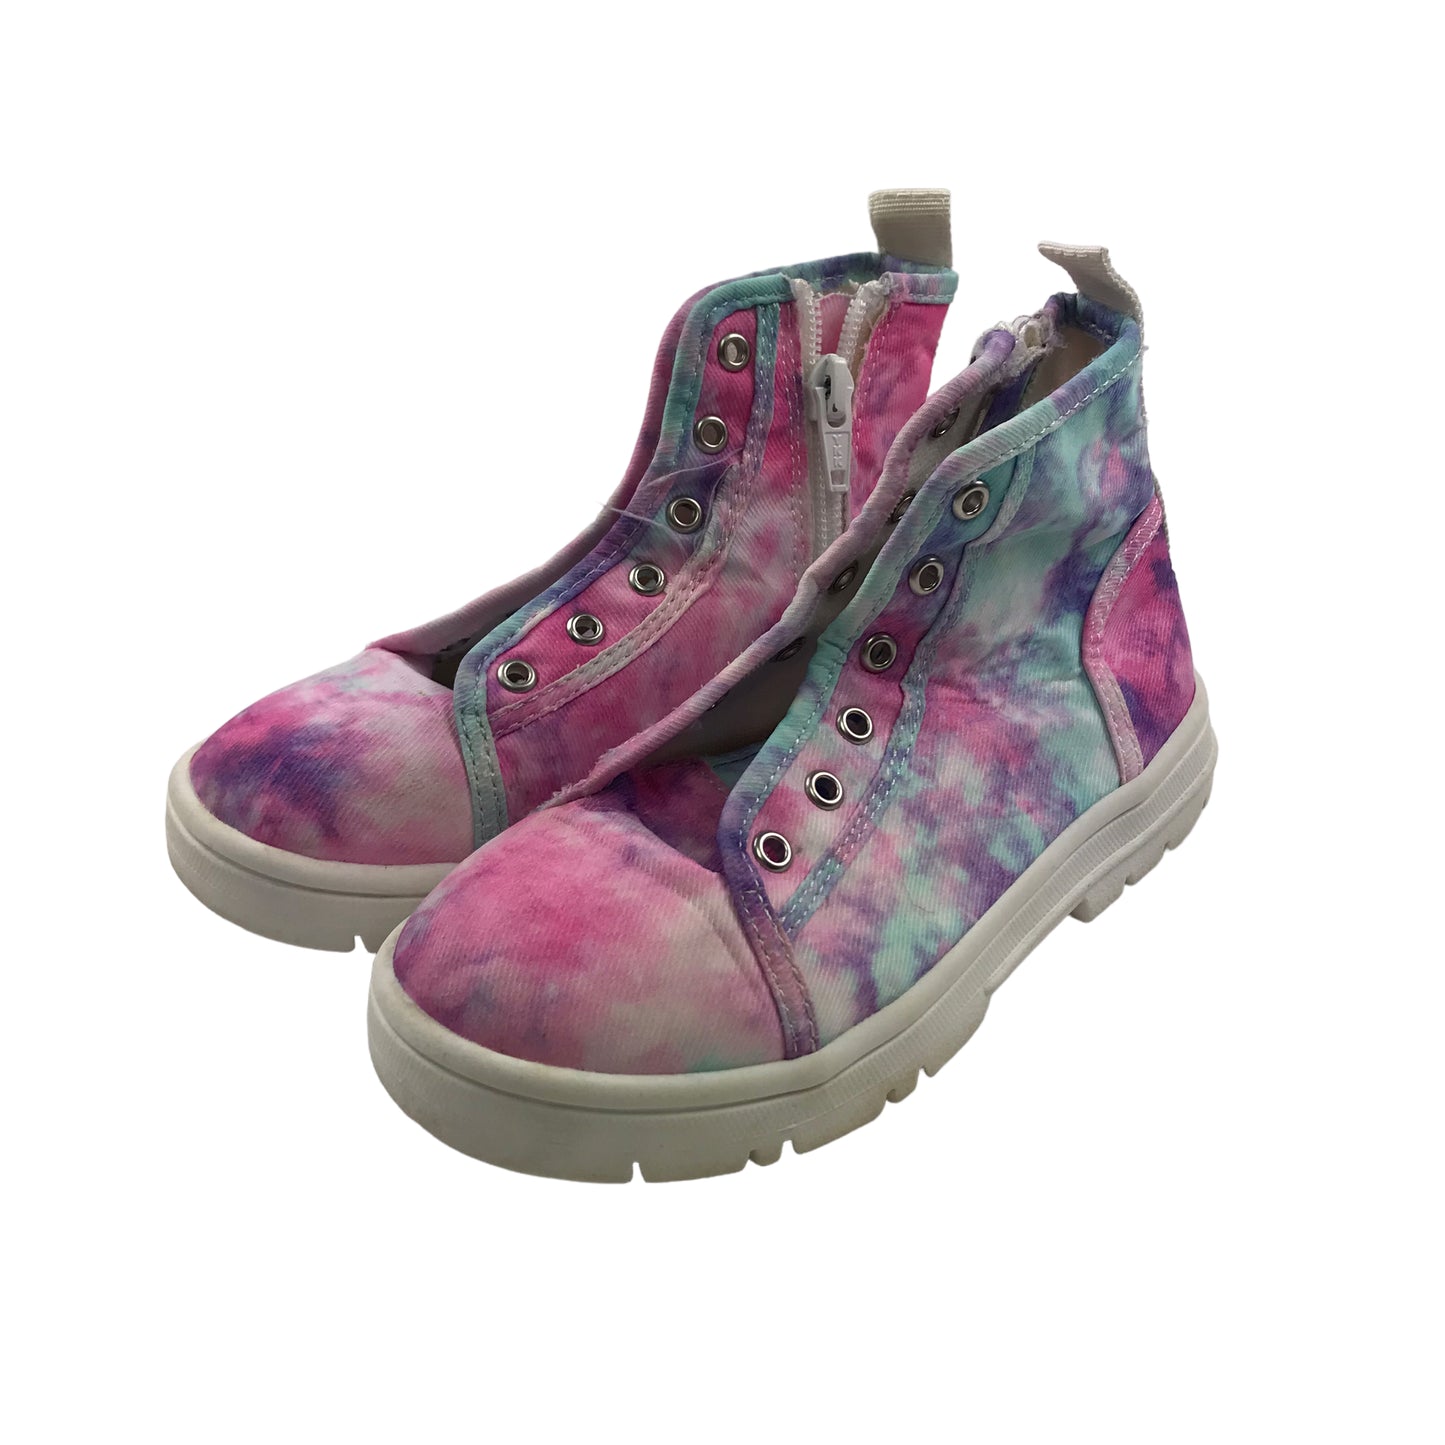 Tu Pink and Blue Tie Dye High Tops Trainers Shoe Size 10 junior